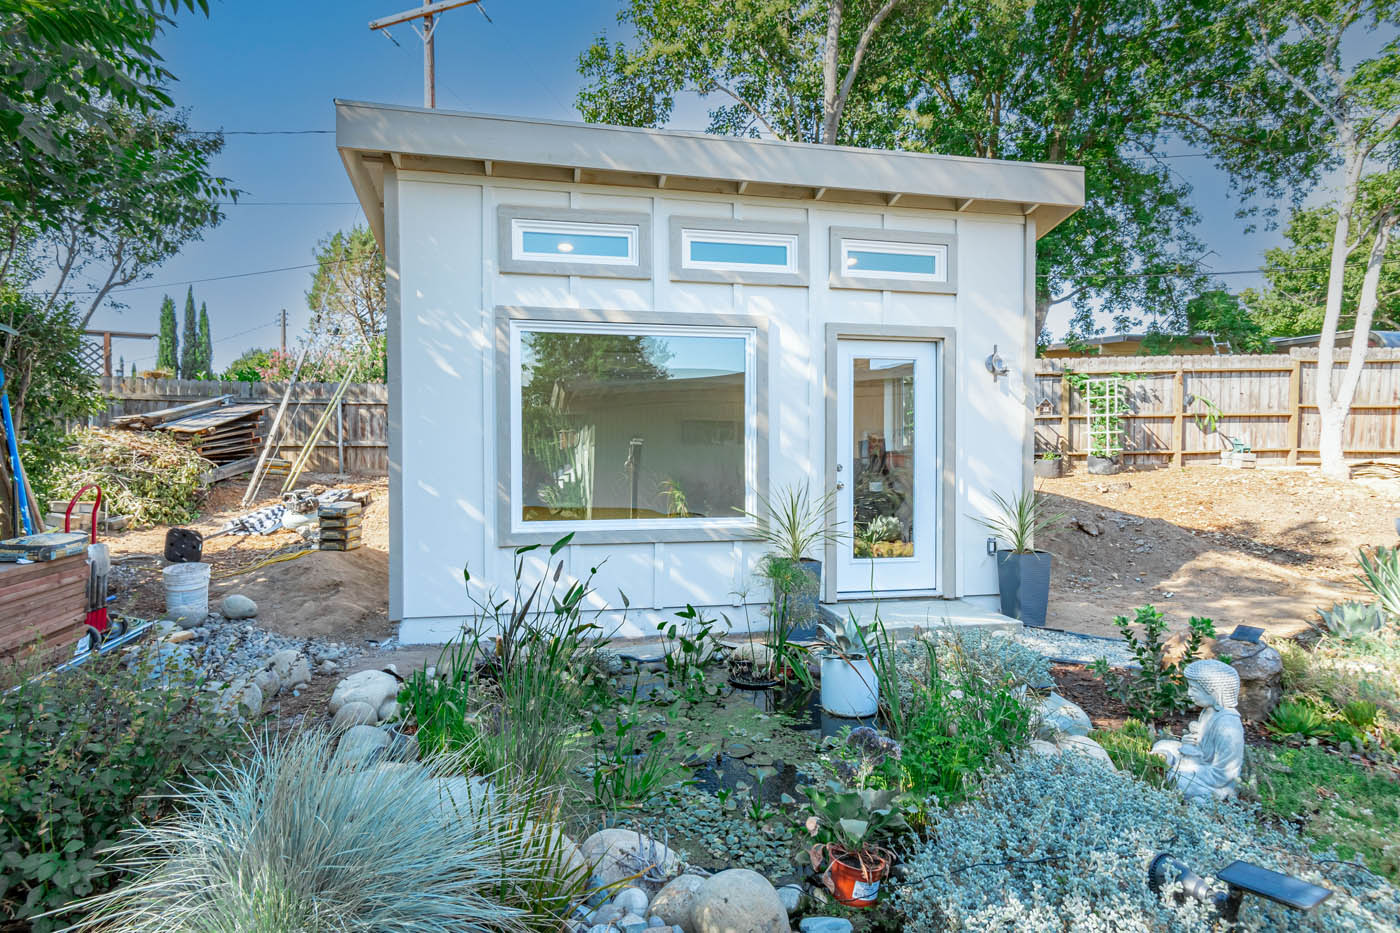 A Rhode Island detached ADU in a California backyard by a pool, learn more about our best tiny home builder in Rhode Island.